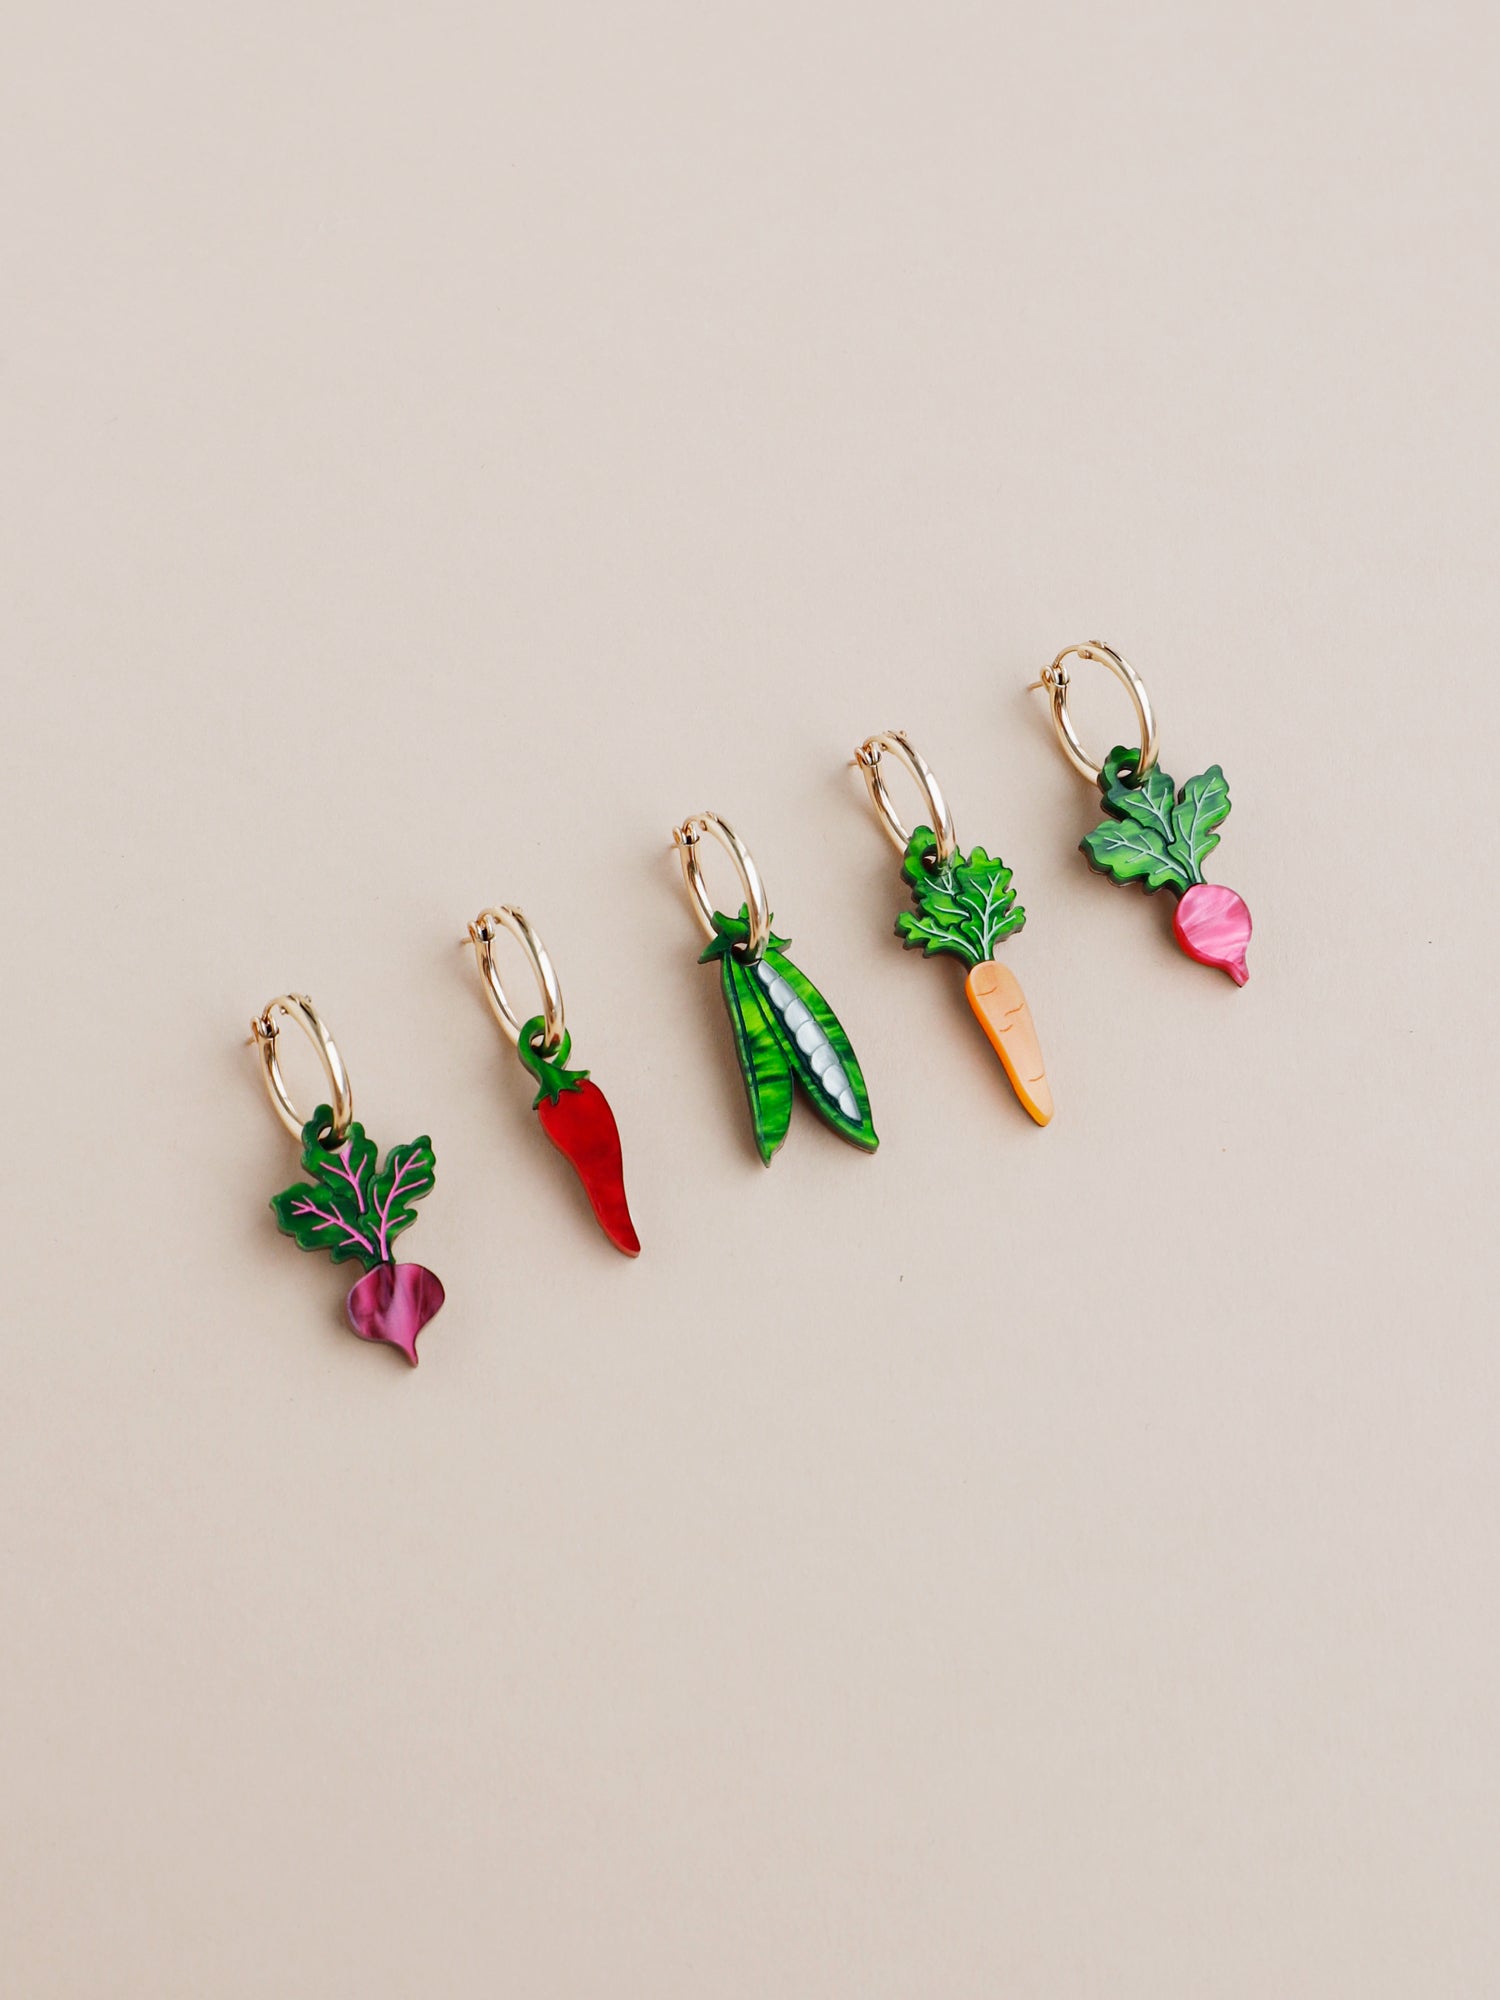 Our Five A Day set includes 1x Radish charm, 1 x Chilli Pepper charm , 1 x Carrot charm , 1 x Peas in a Pod charm, 1 x Beetroot charm. Charms that can be purchased with our gold-filled hoops. Handmade in London by Wolf & Moon.